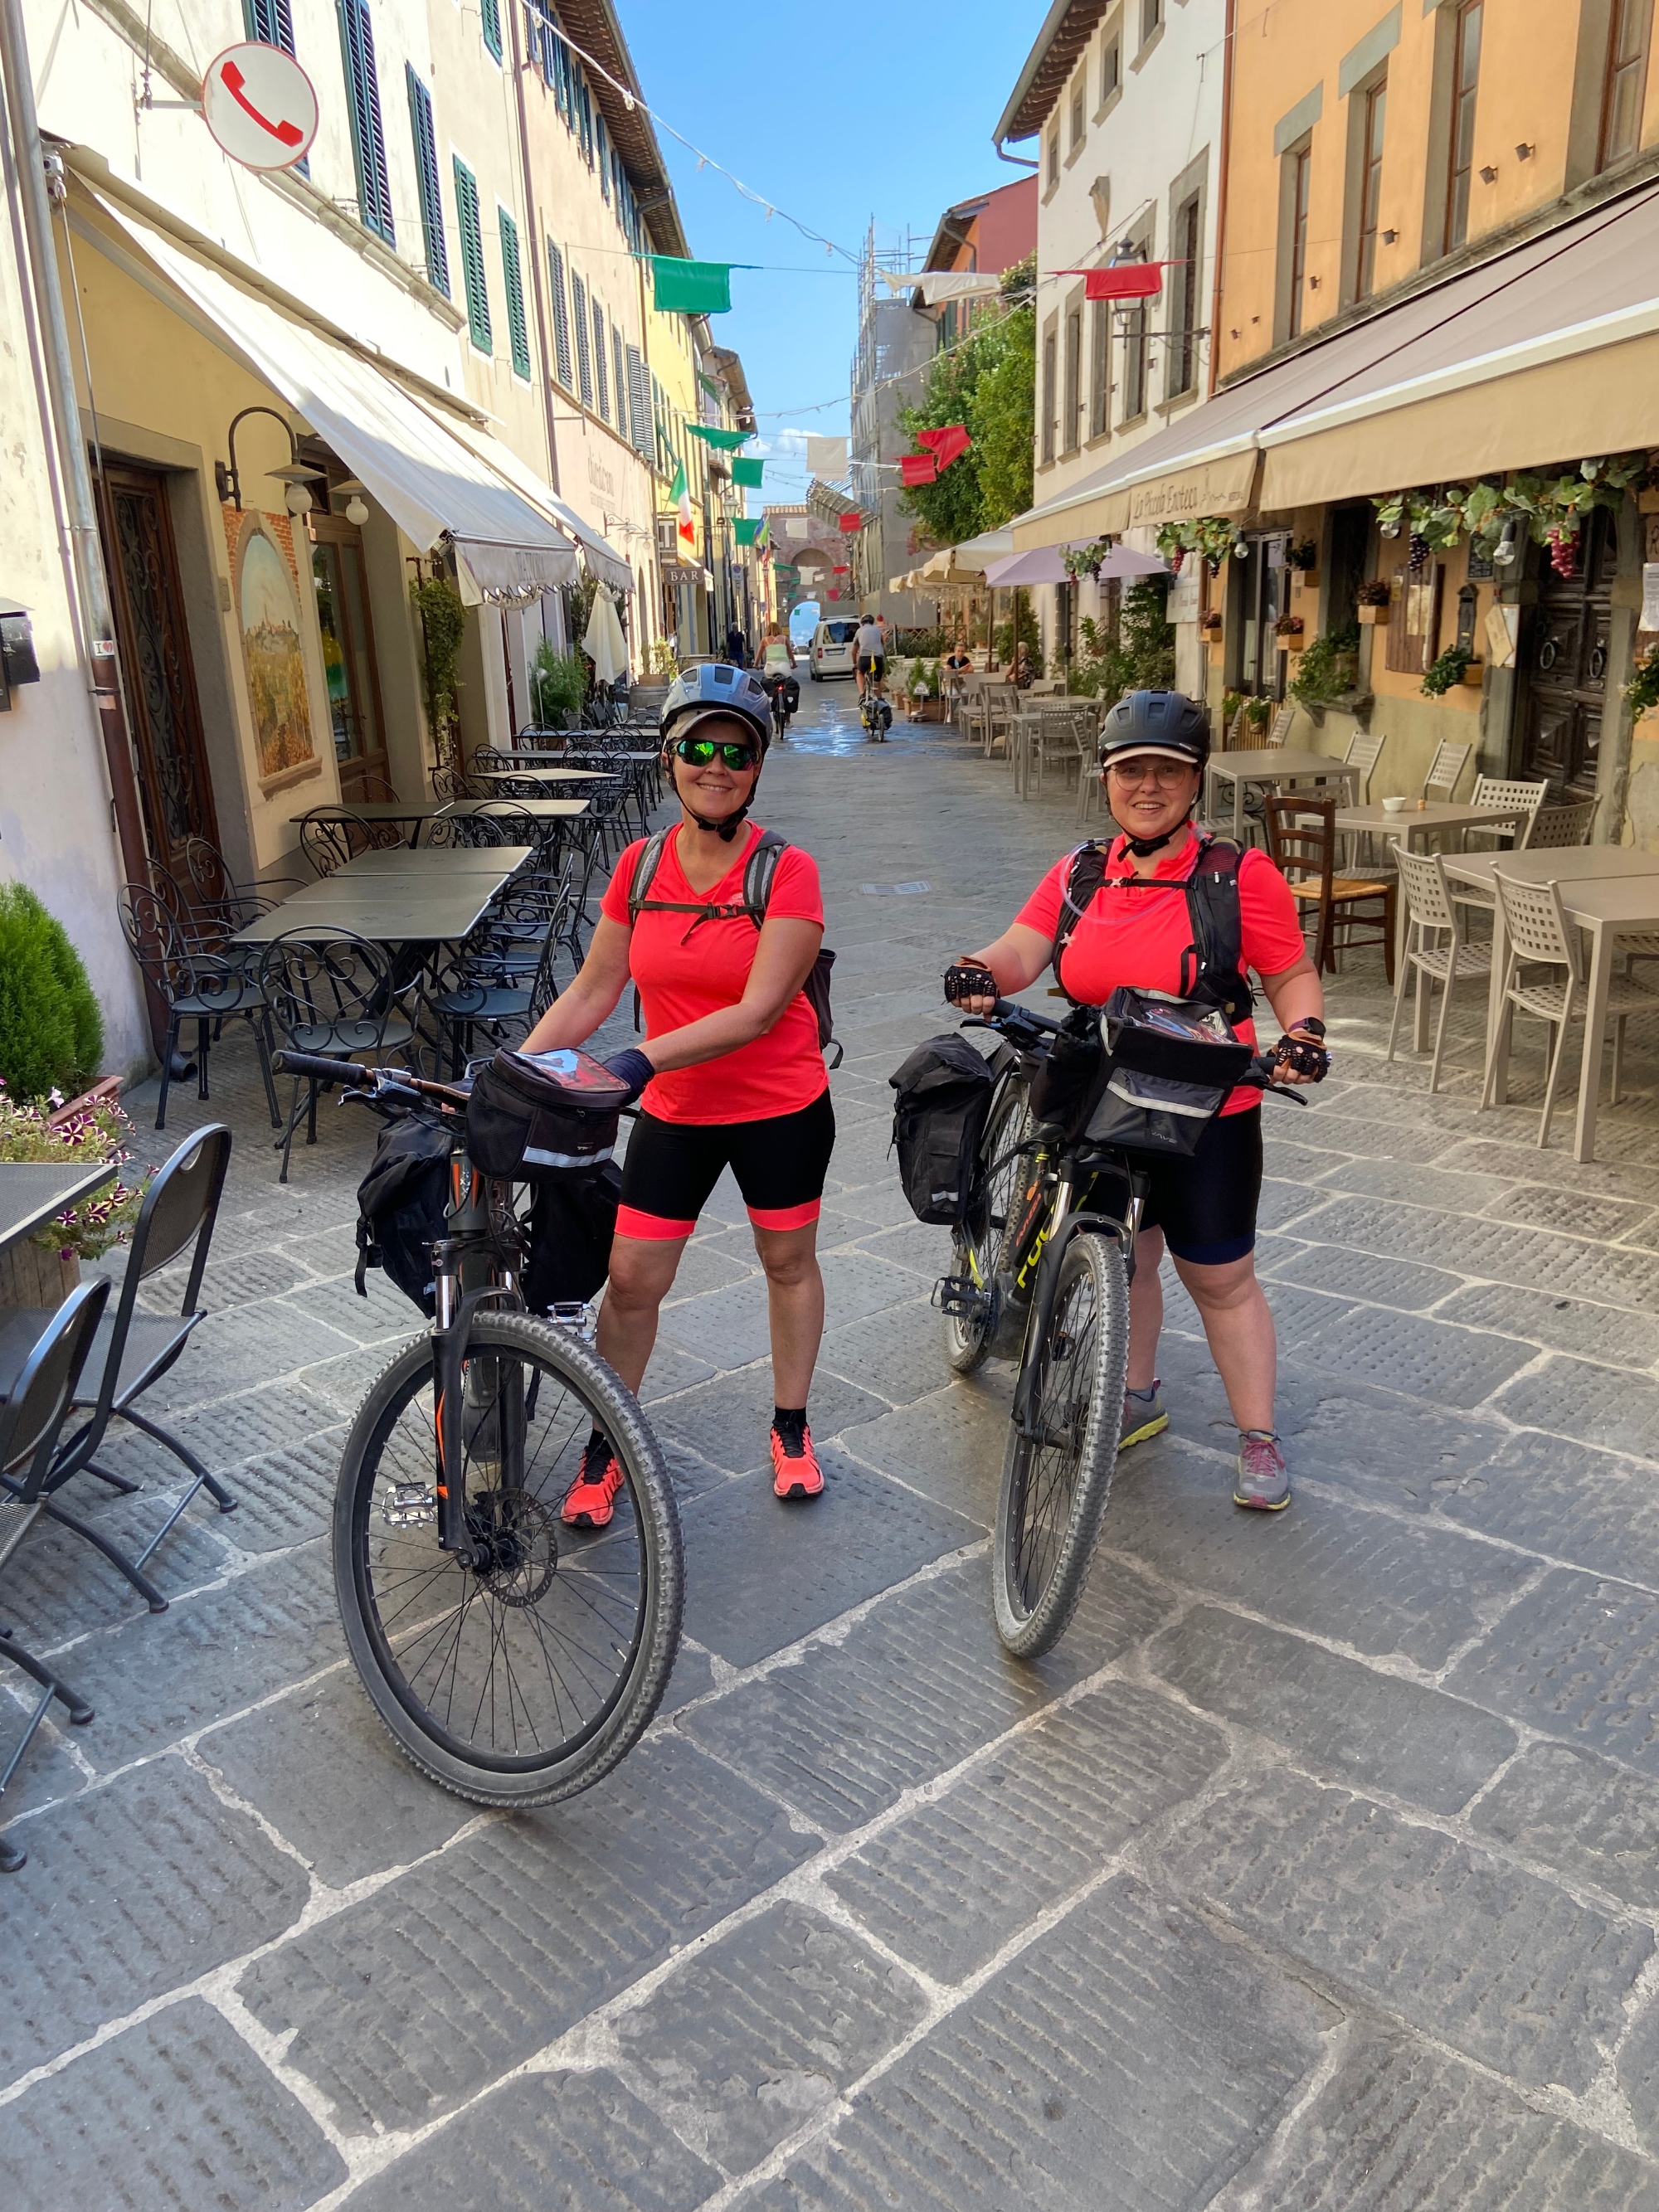 Eight-day self guided cycle tour from Lucca to Siena